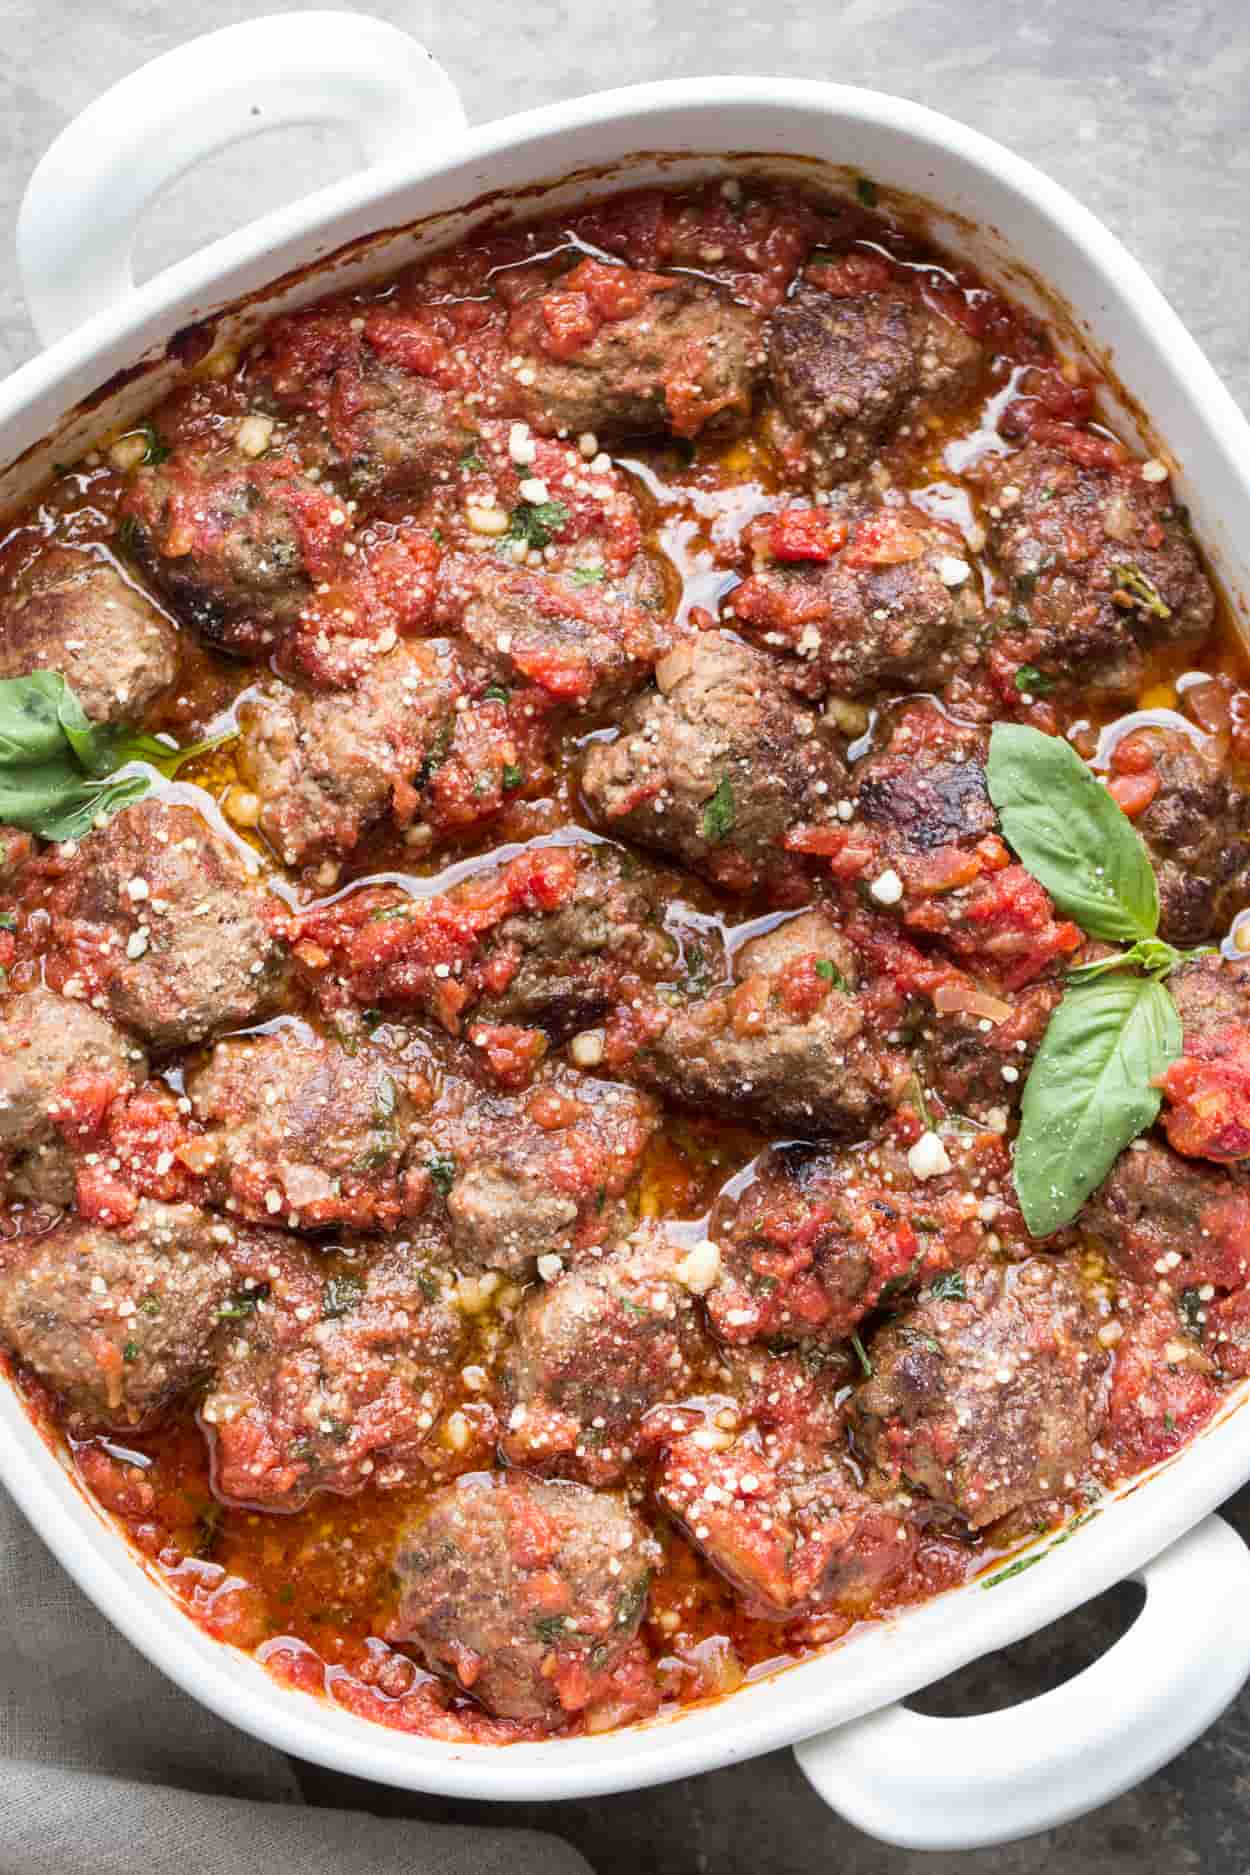 Meatball recipe made from scratch and baked to perfection in a homemade marinara sauce. Baked in a casserole dish.